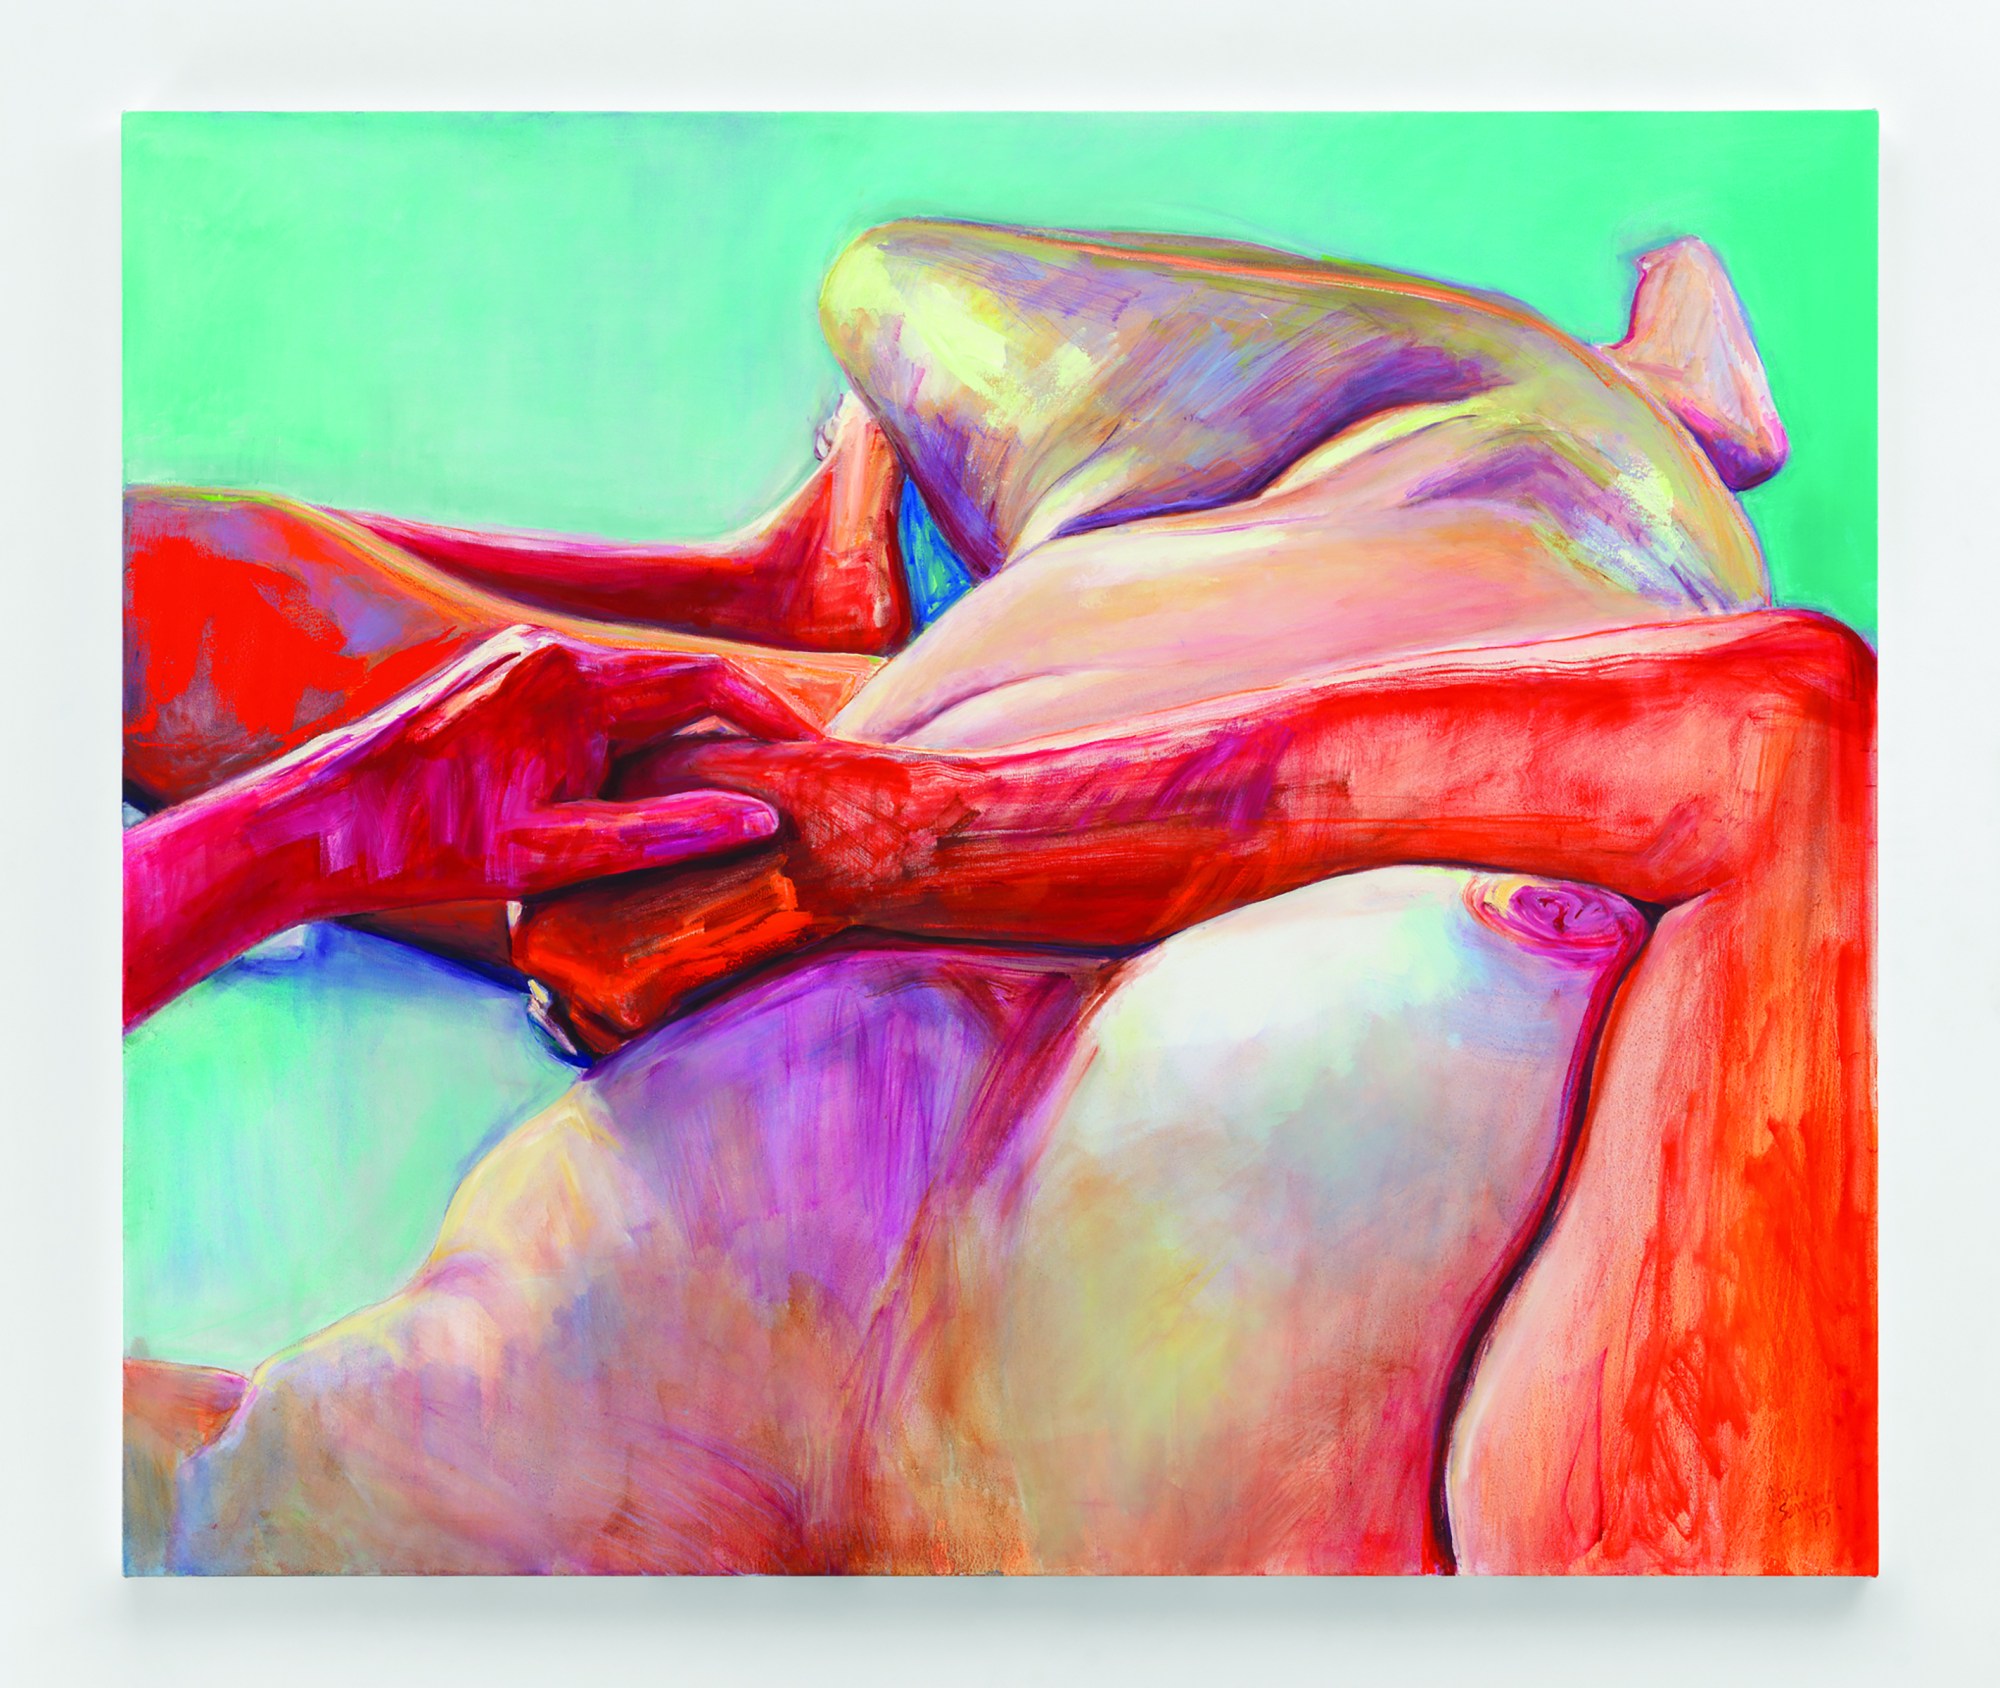 A colorful, expressive figure seem from the neck down, lying in a turqouise expanse.